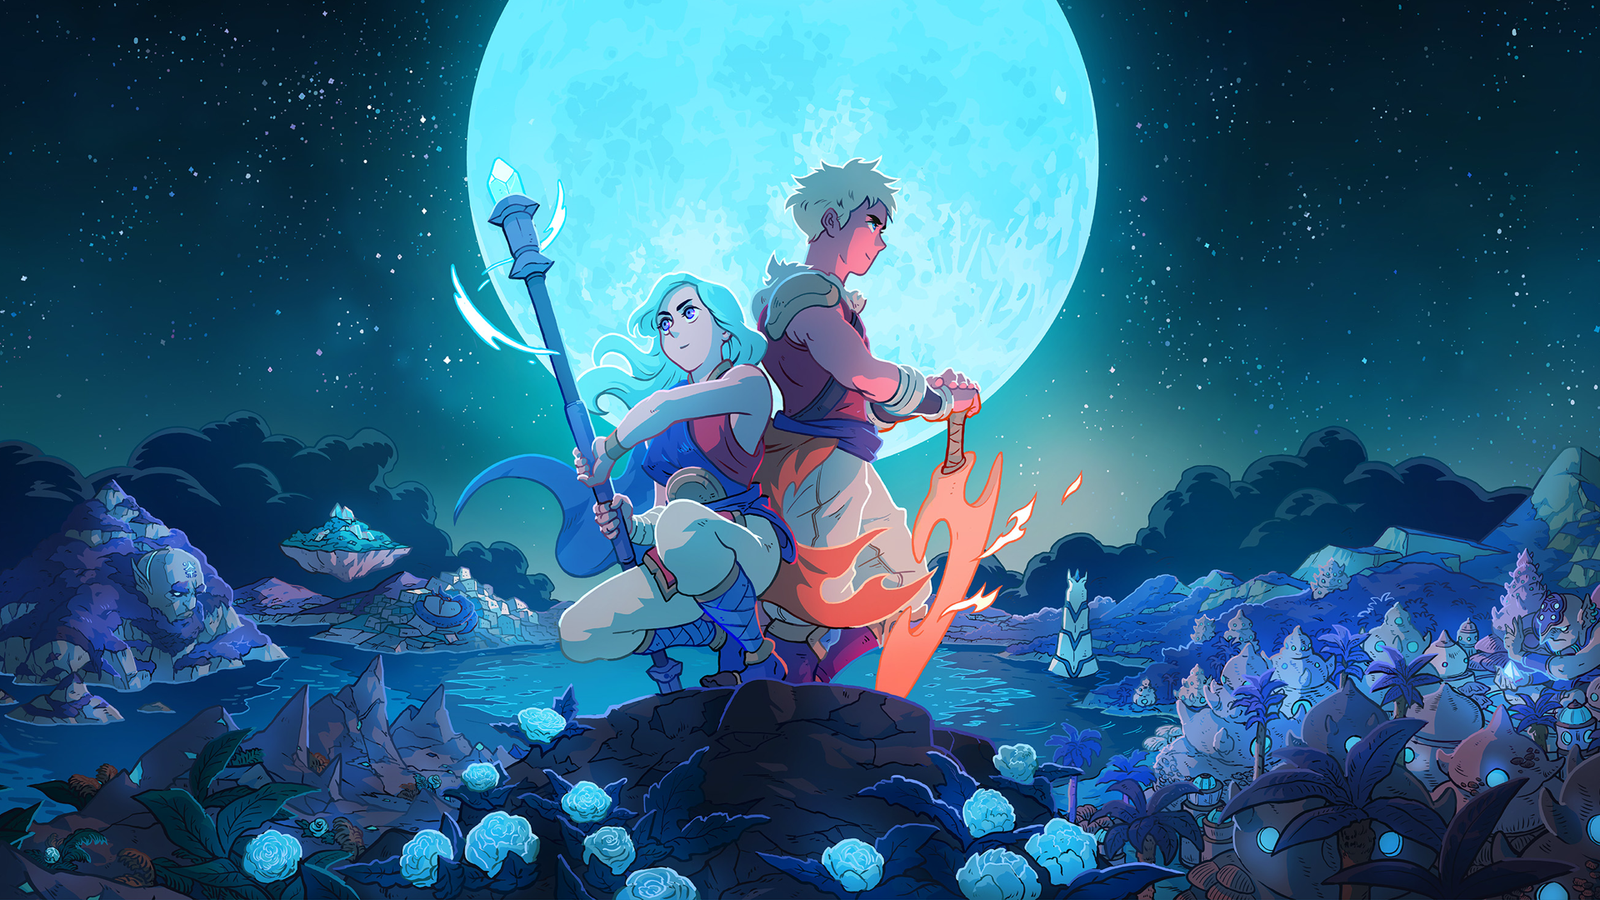 Key art of Sea of Stars, showing main characters Zale and Valere.